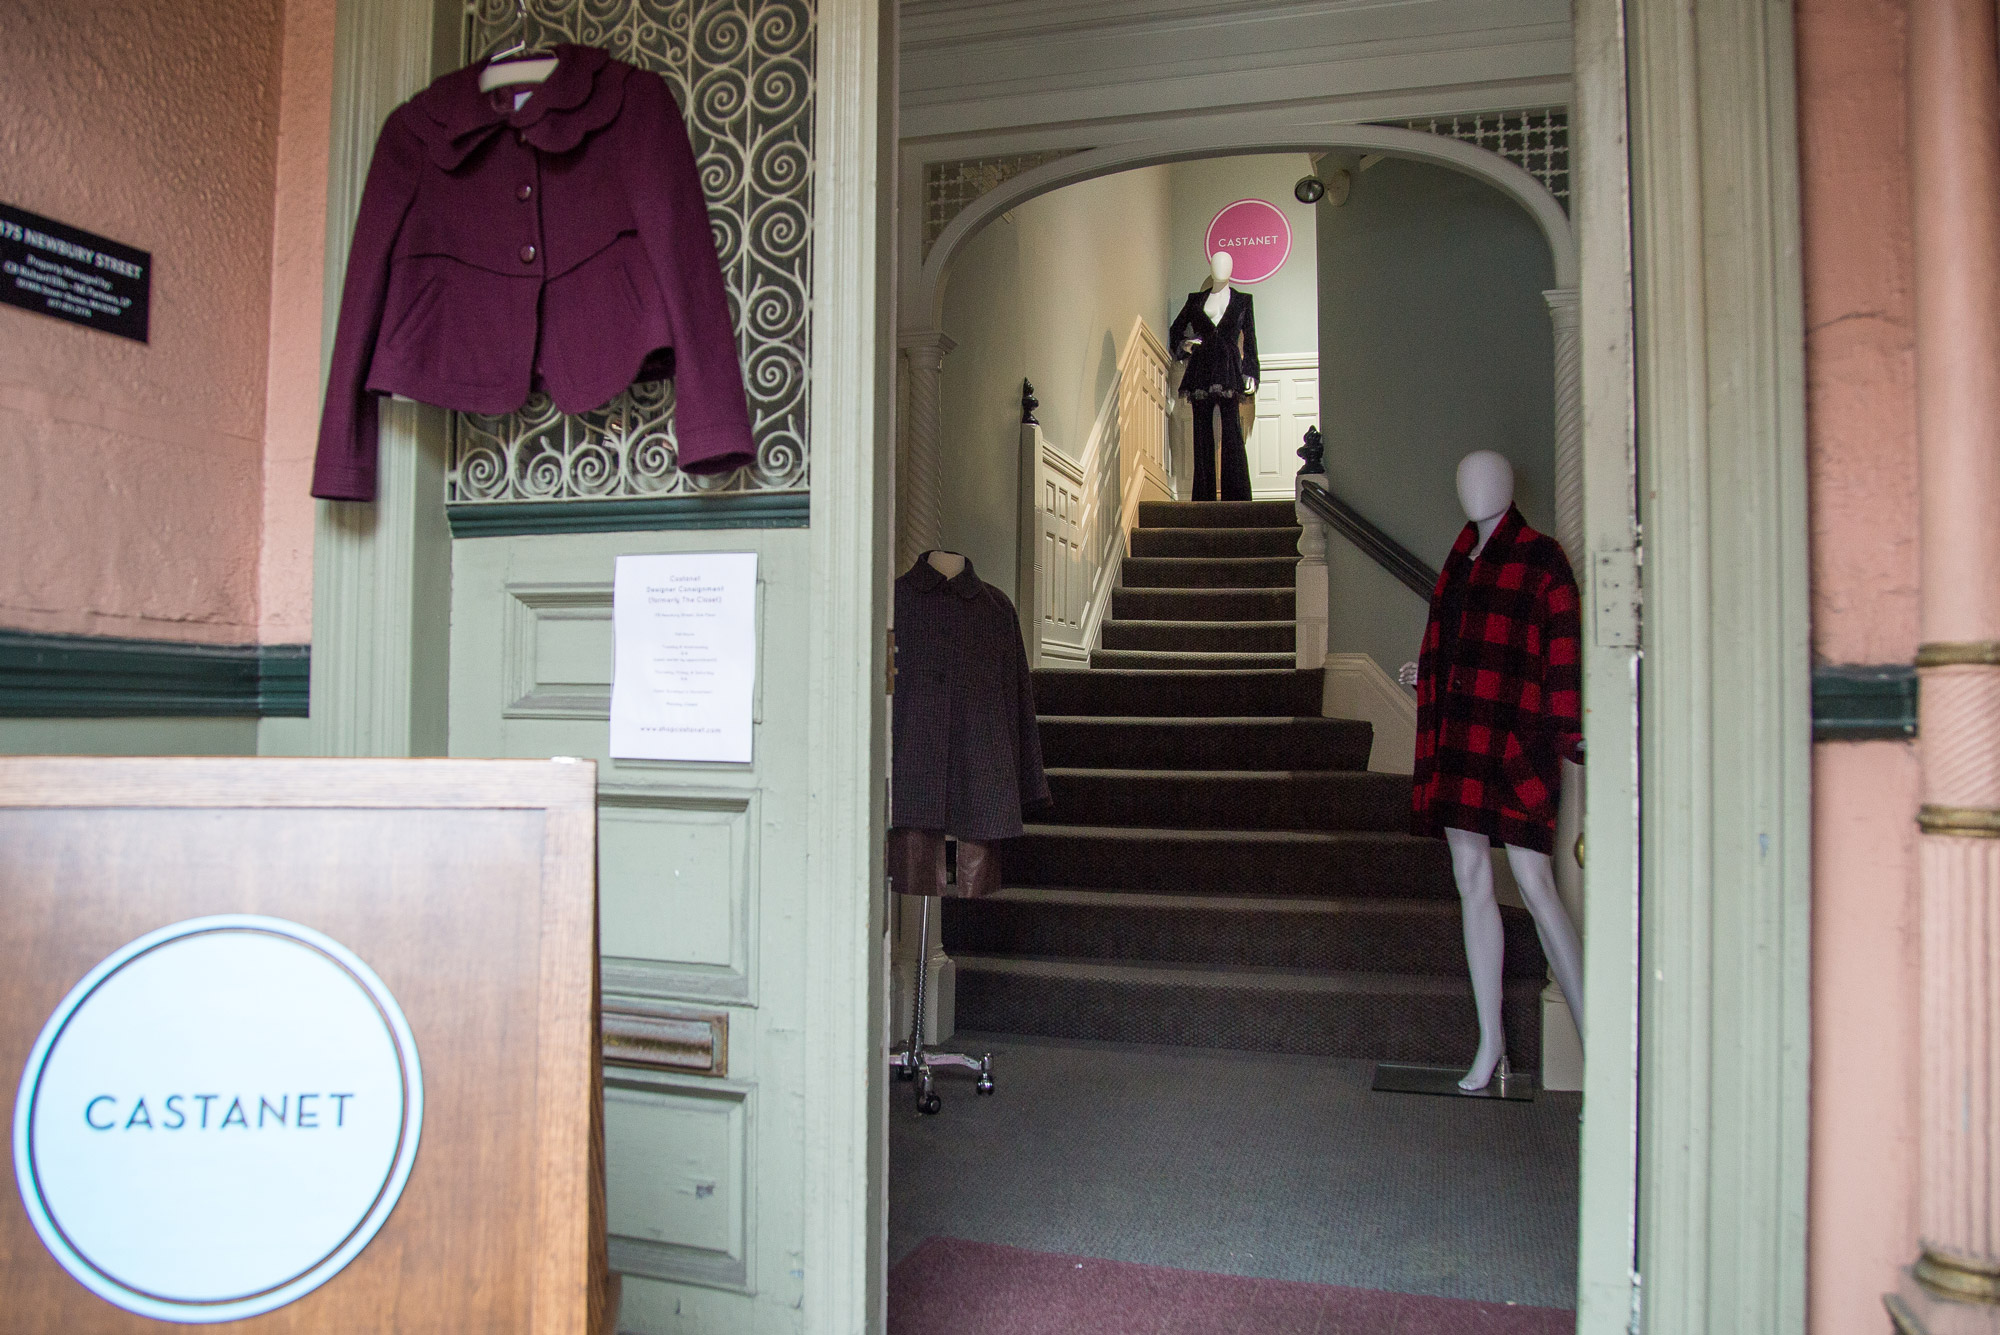 Stylish mannequins line the stairs leading up to Castanet